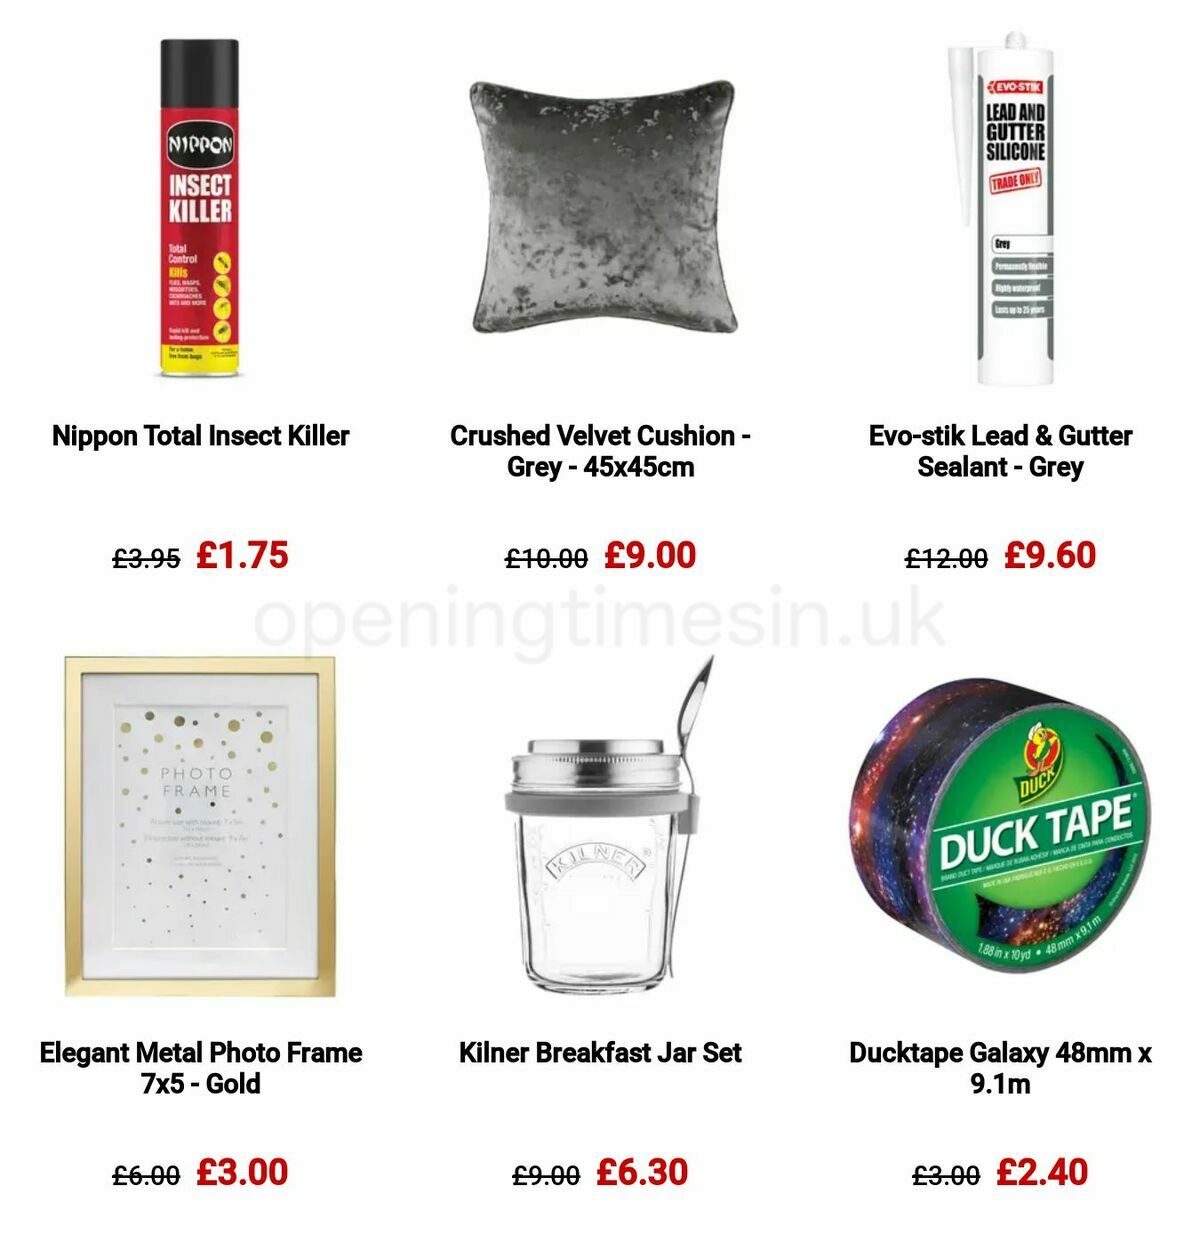 Homebase Offers from 9 March